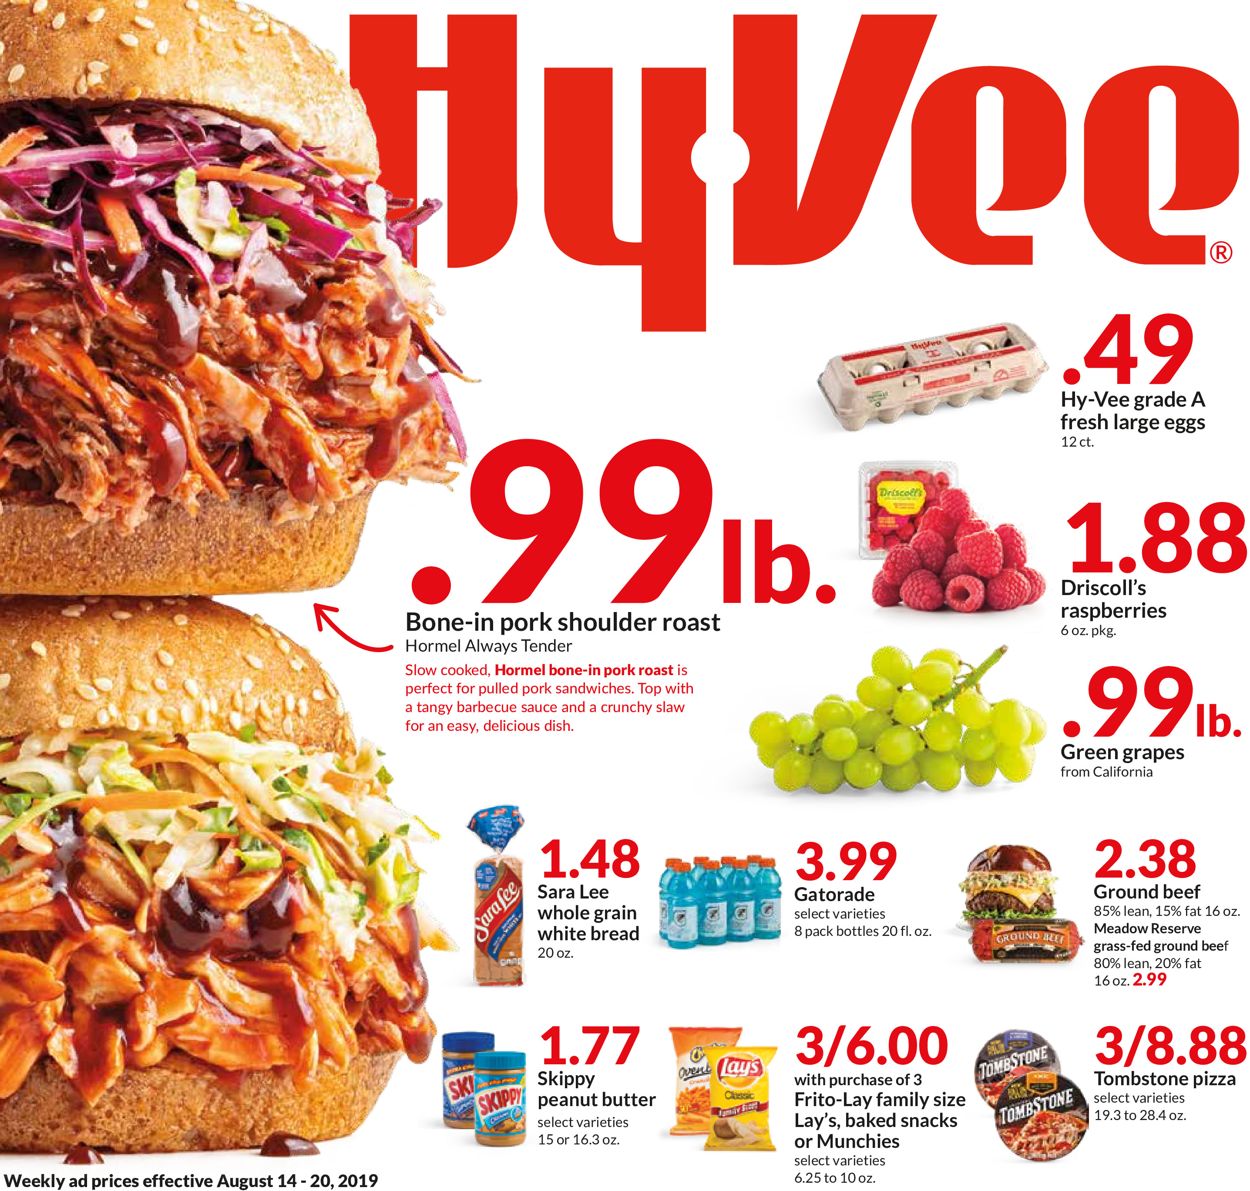 Valid 08/14 - 08/20/2019 Check the current HyVee Weekly Ad and don’t miss t...